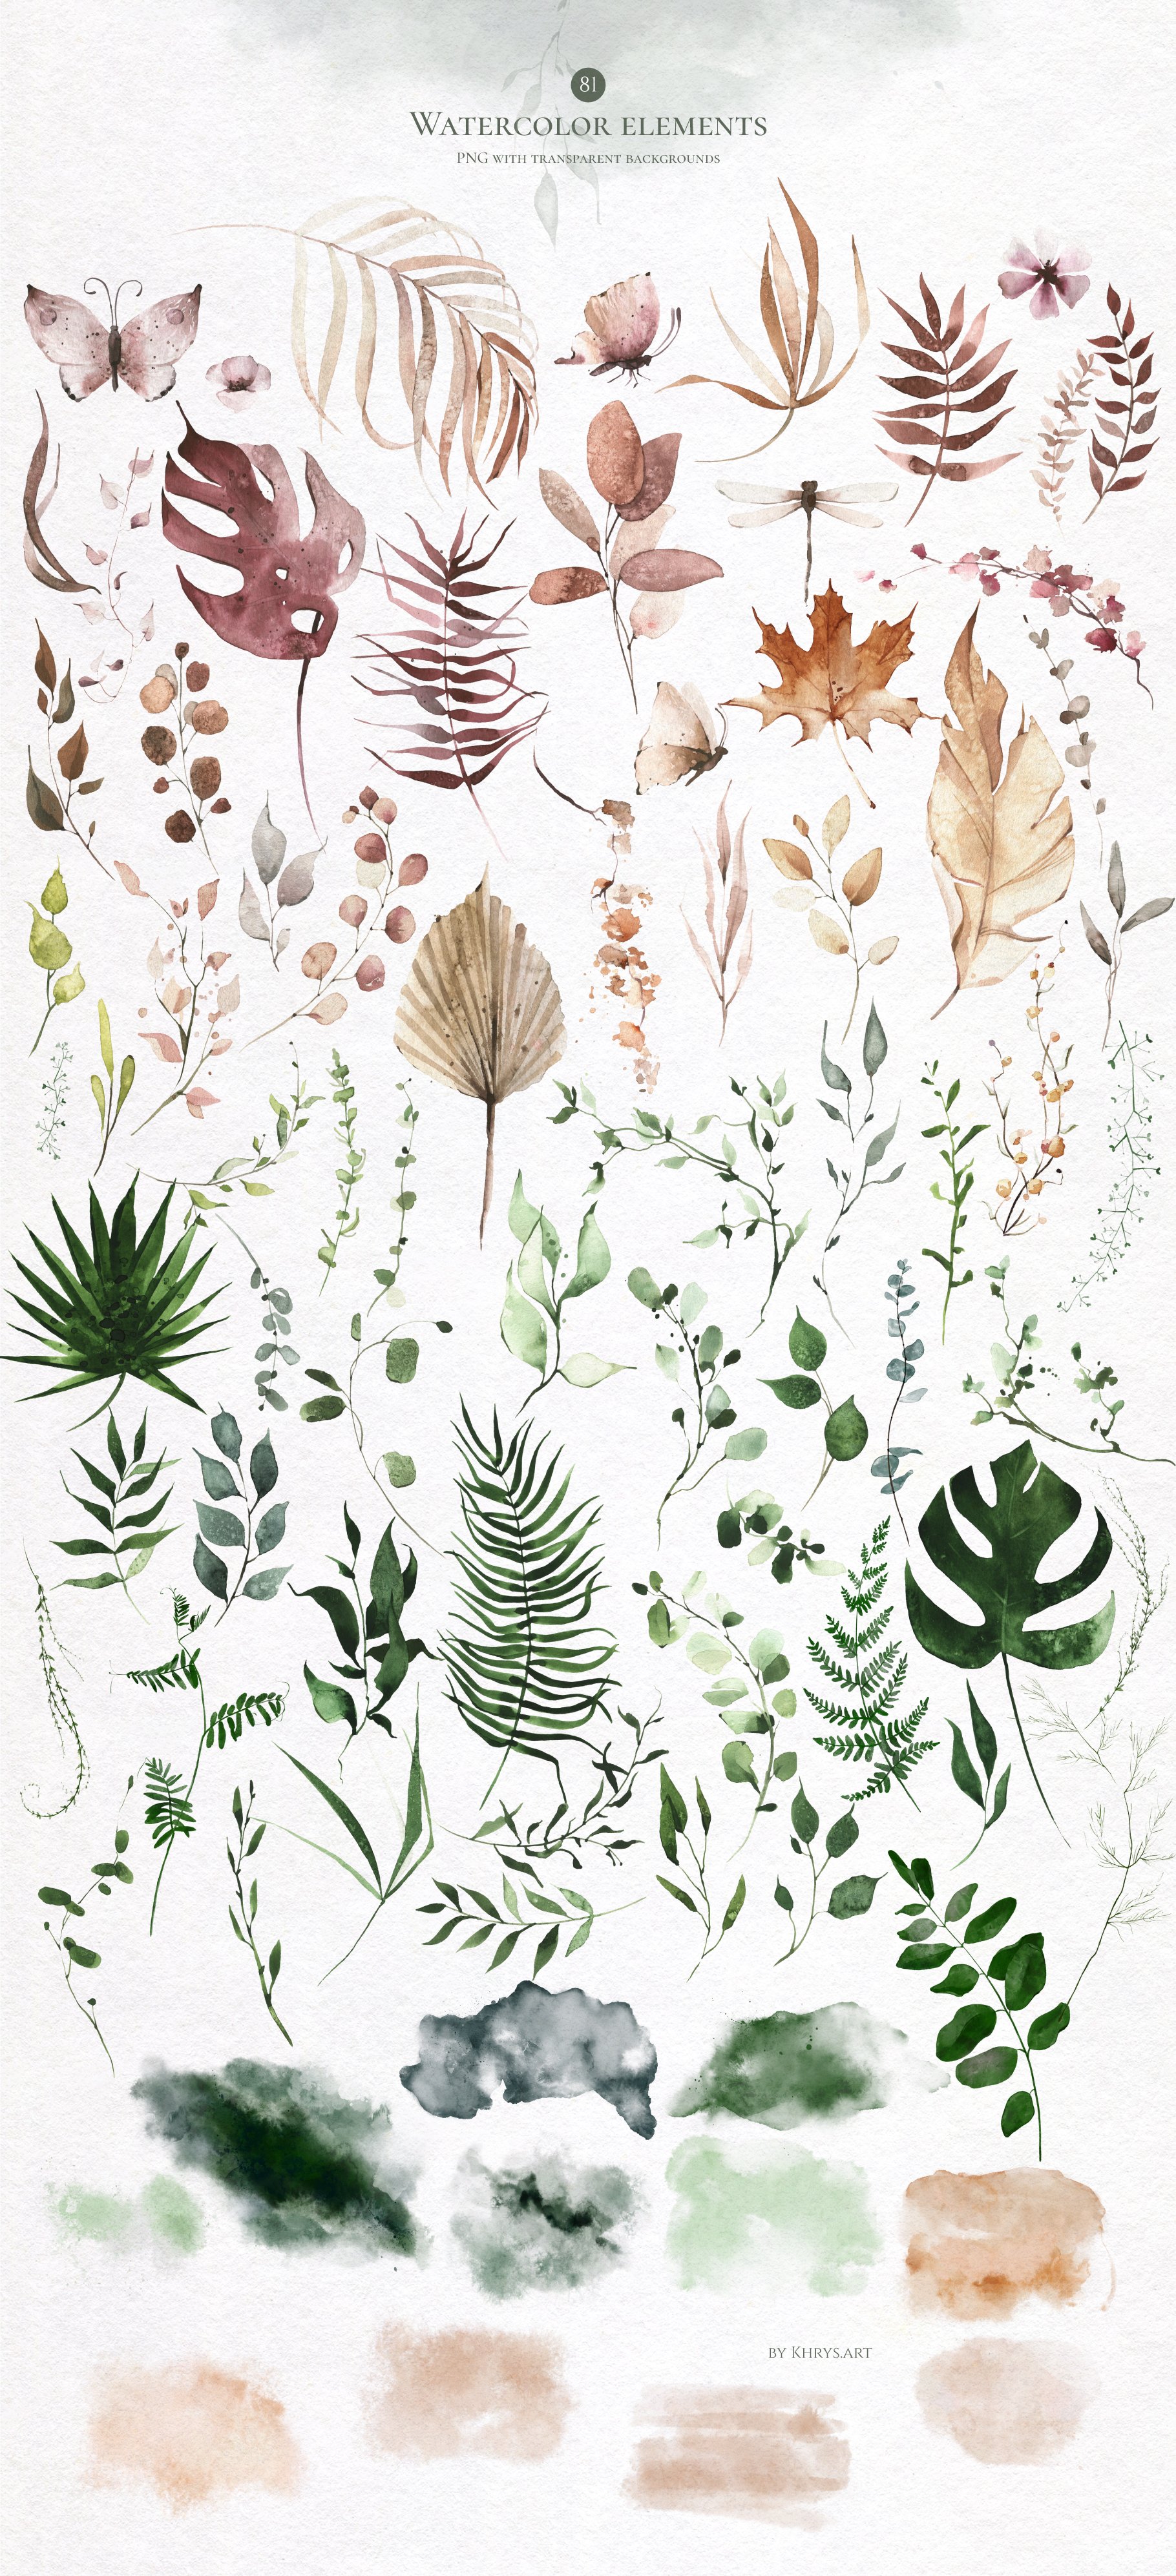 Watercolor painting of a variety of plants by Louise Abbéma.